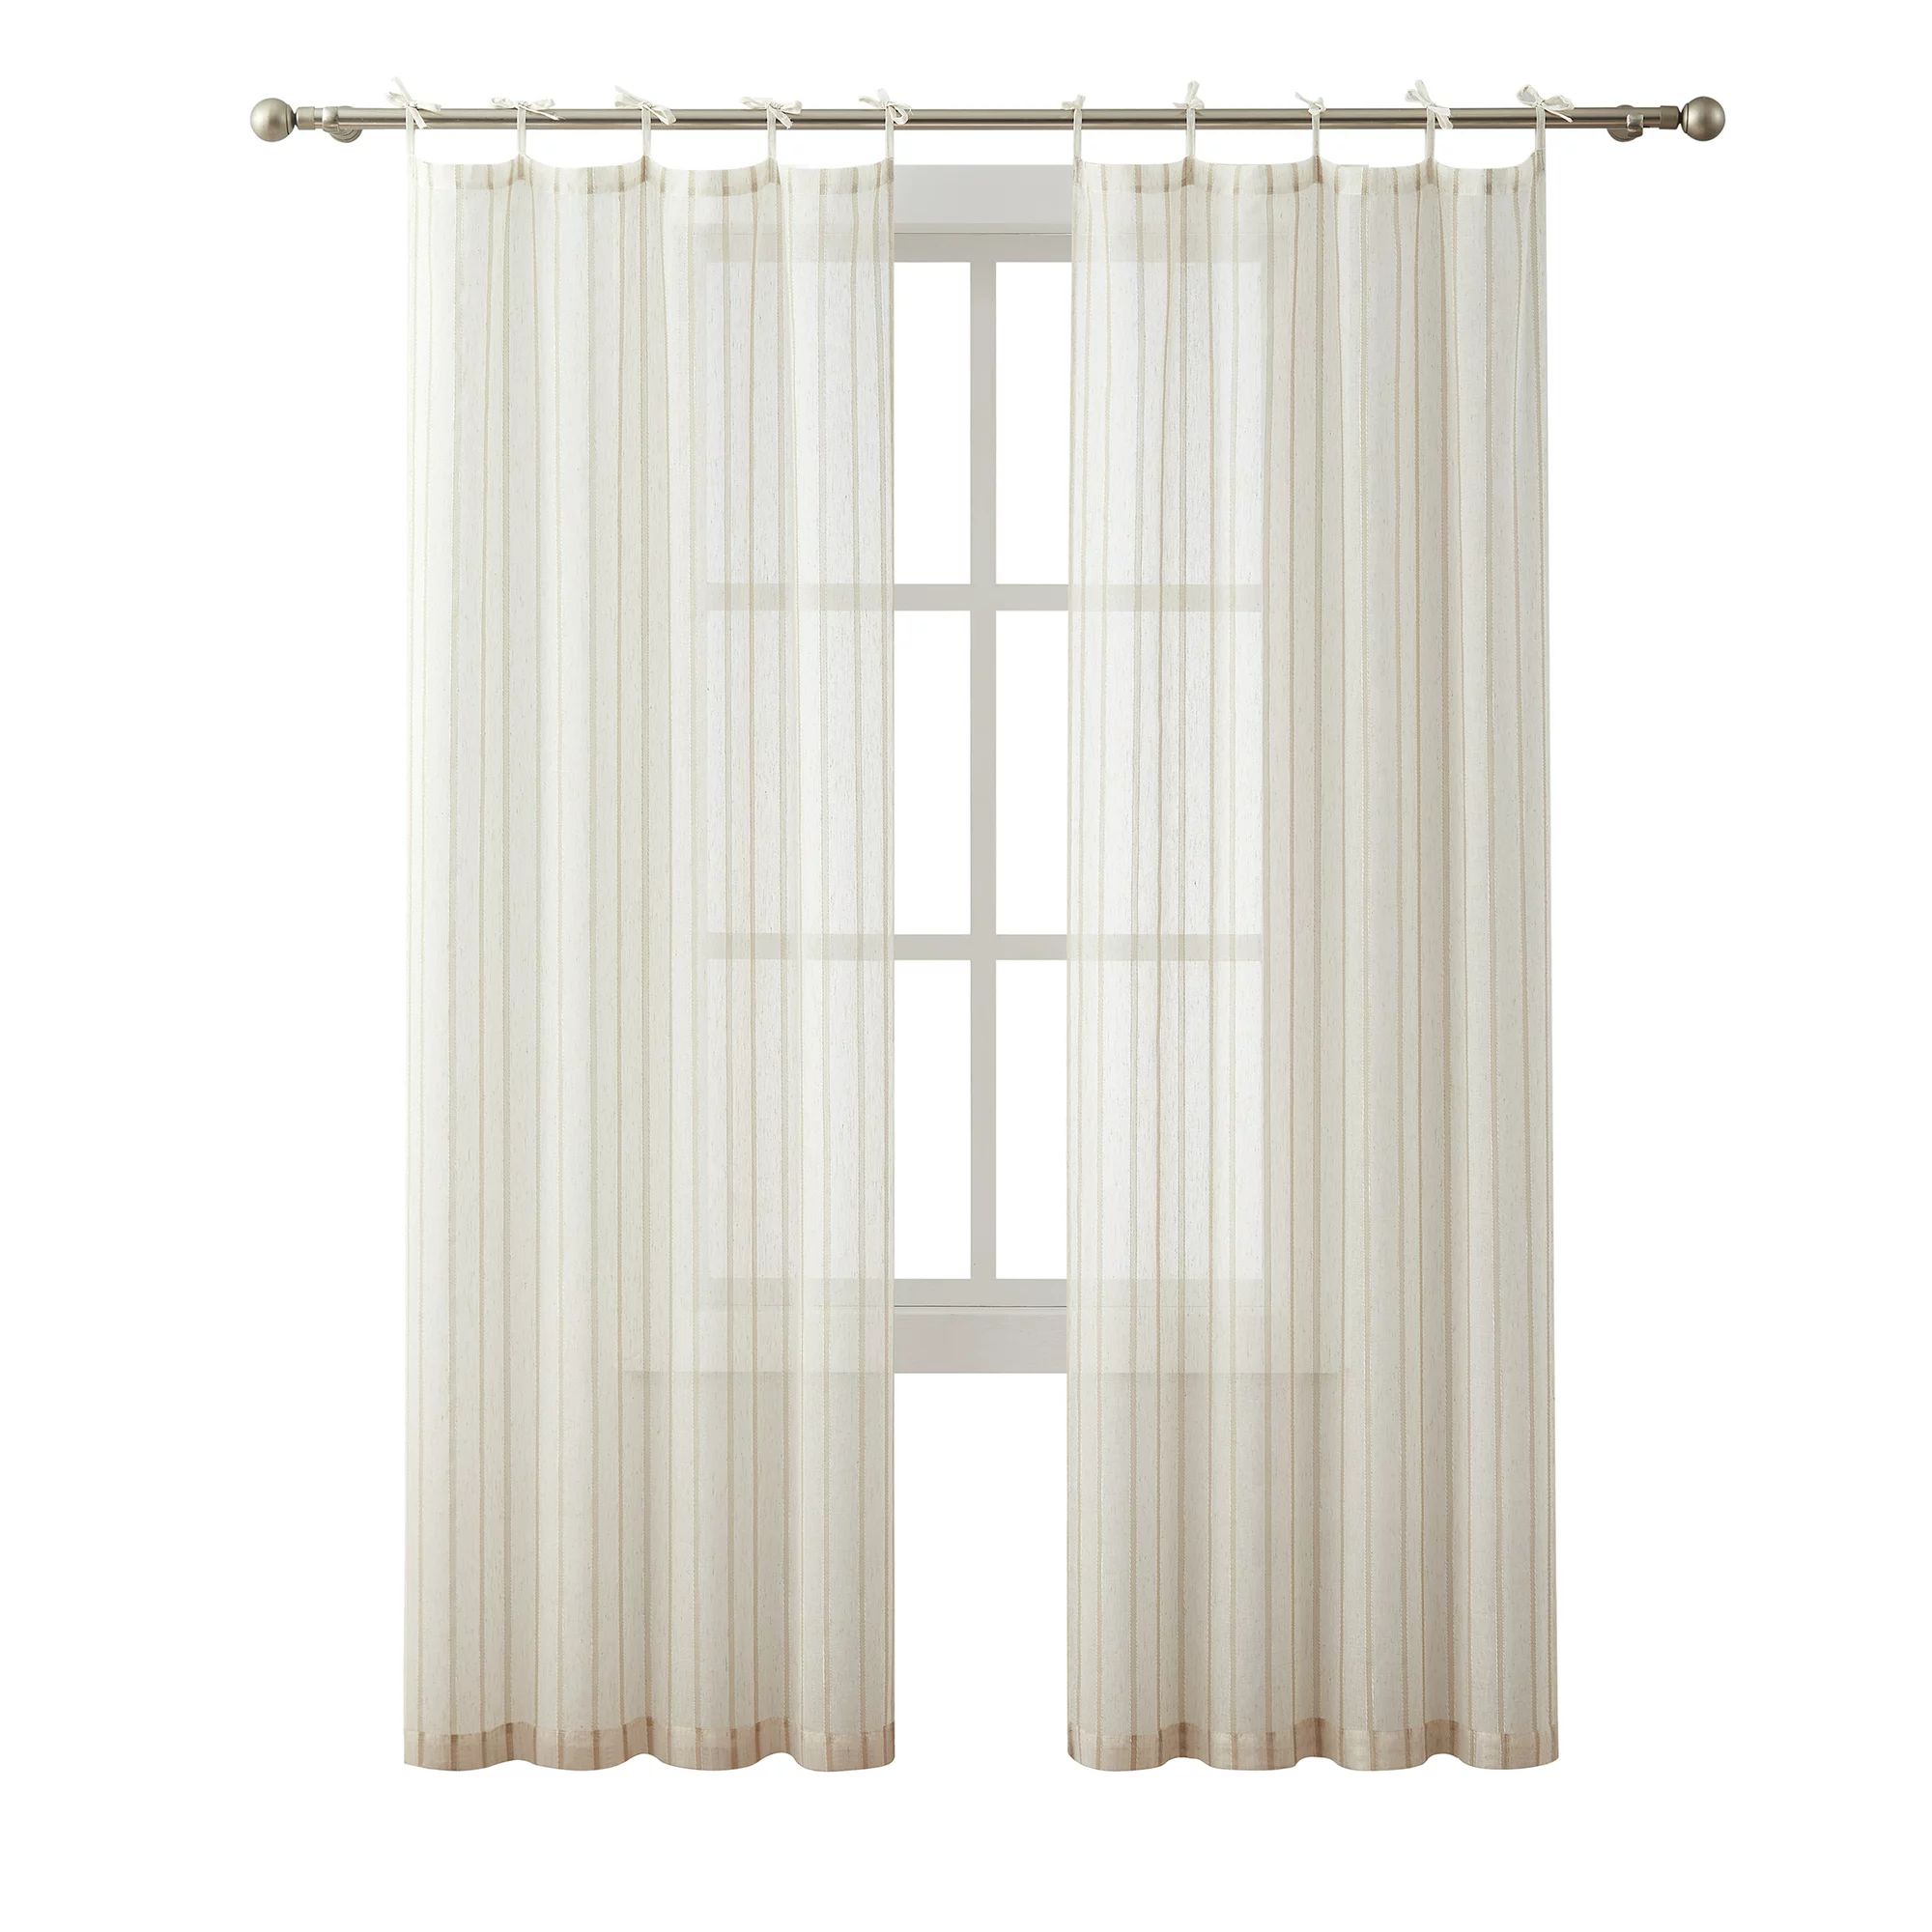 My Texas House Emerson Linen Stripe Light Filtering Tie Top Curtain Panel Pair, Taupe, 76" x 106" | Walmart (US)